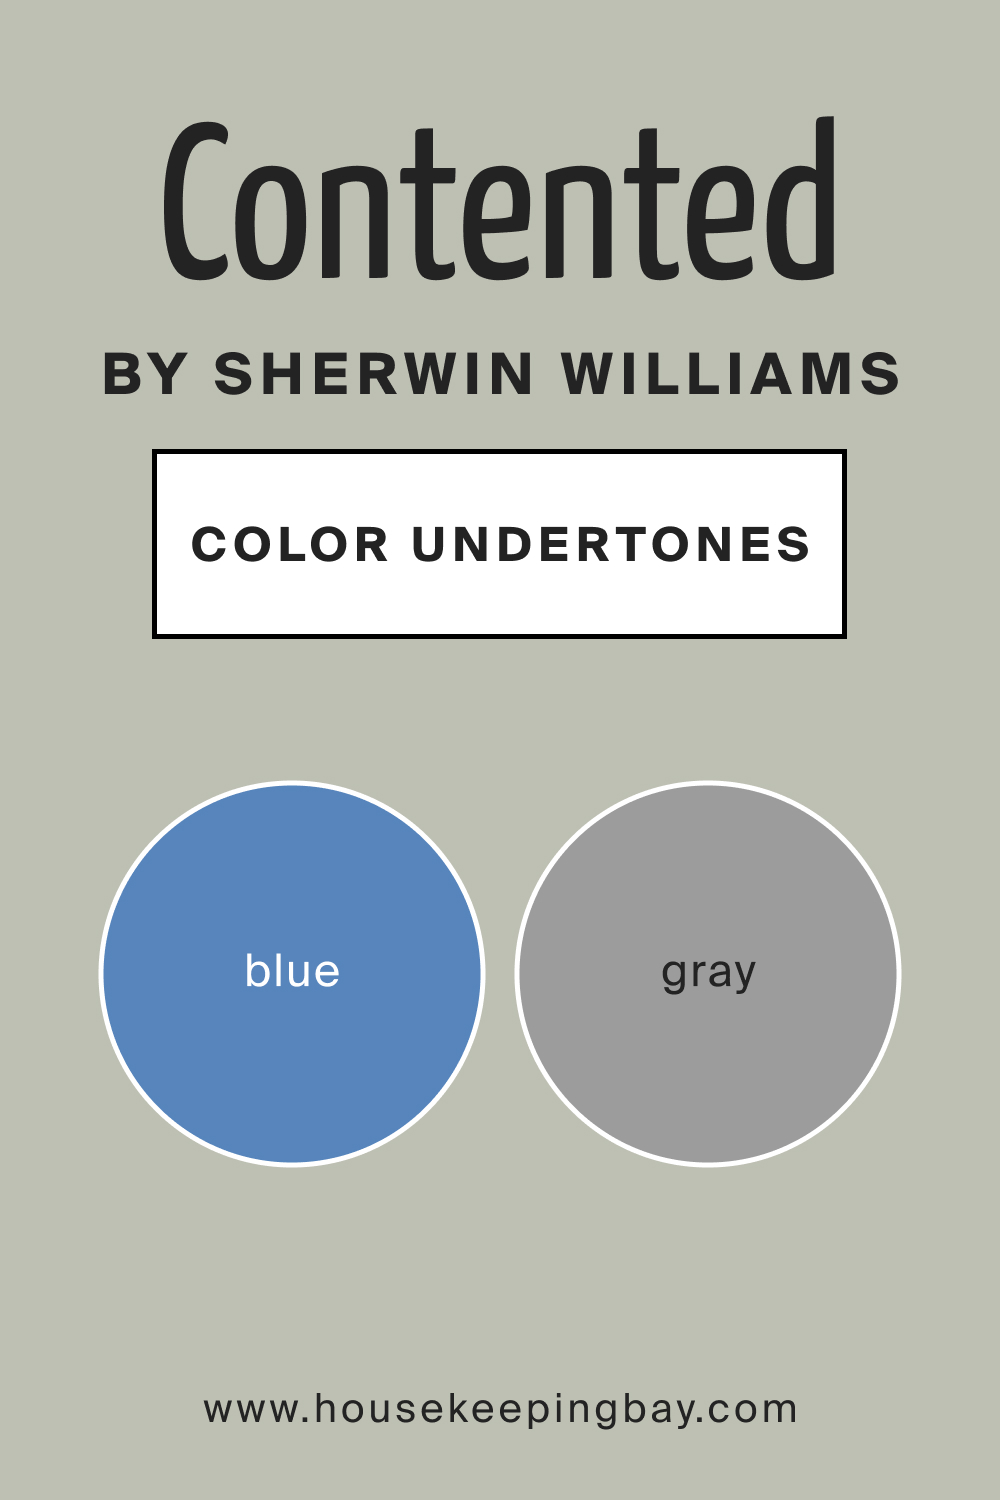 SW 6191 Contented by Sherwin Williams Color Undertone